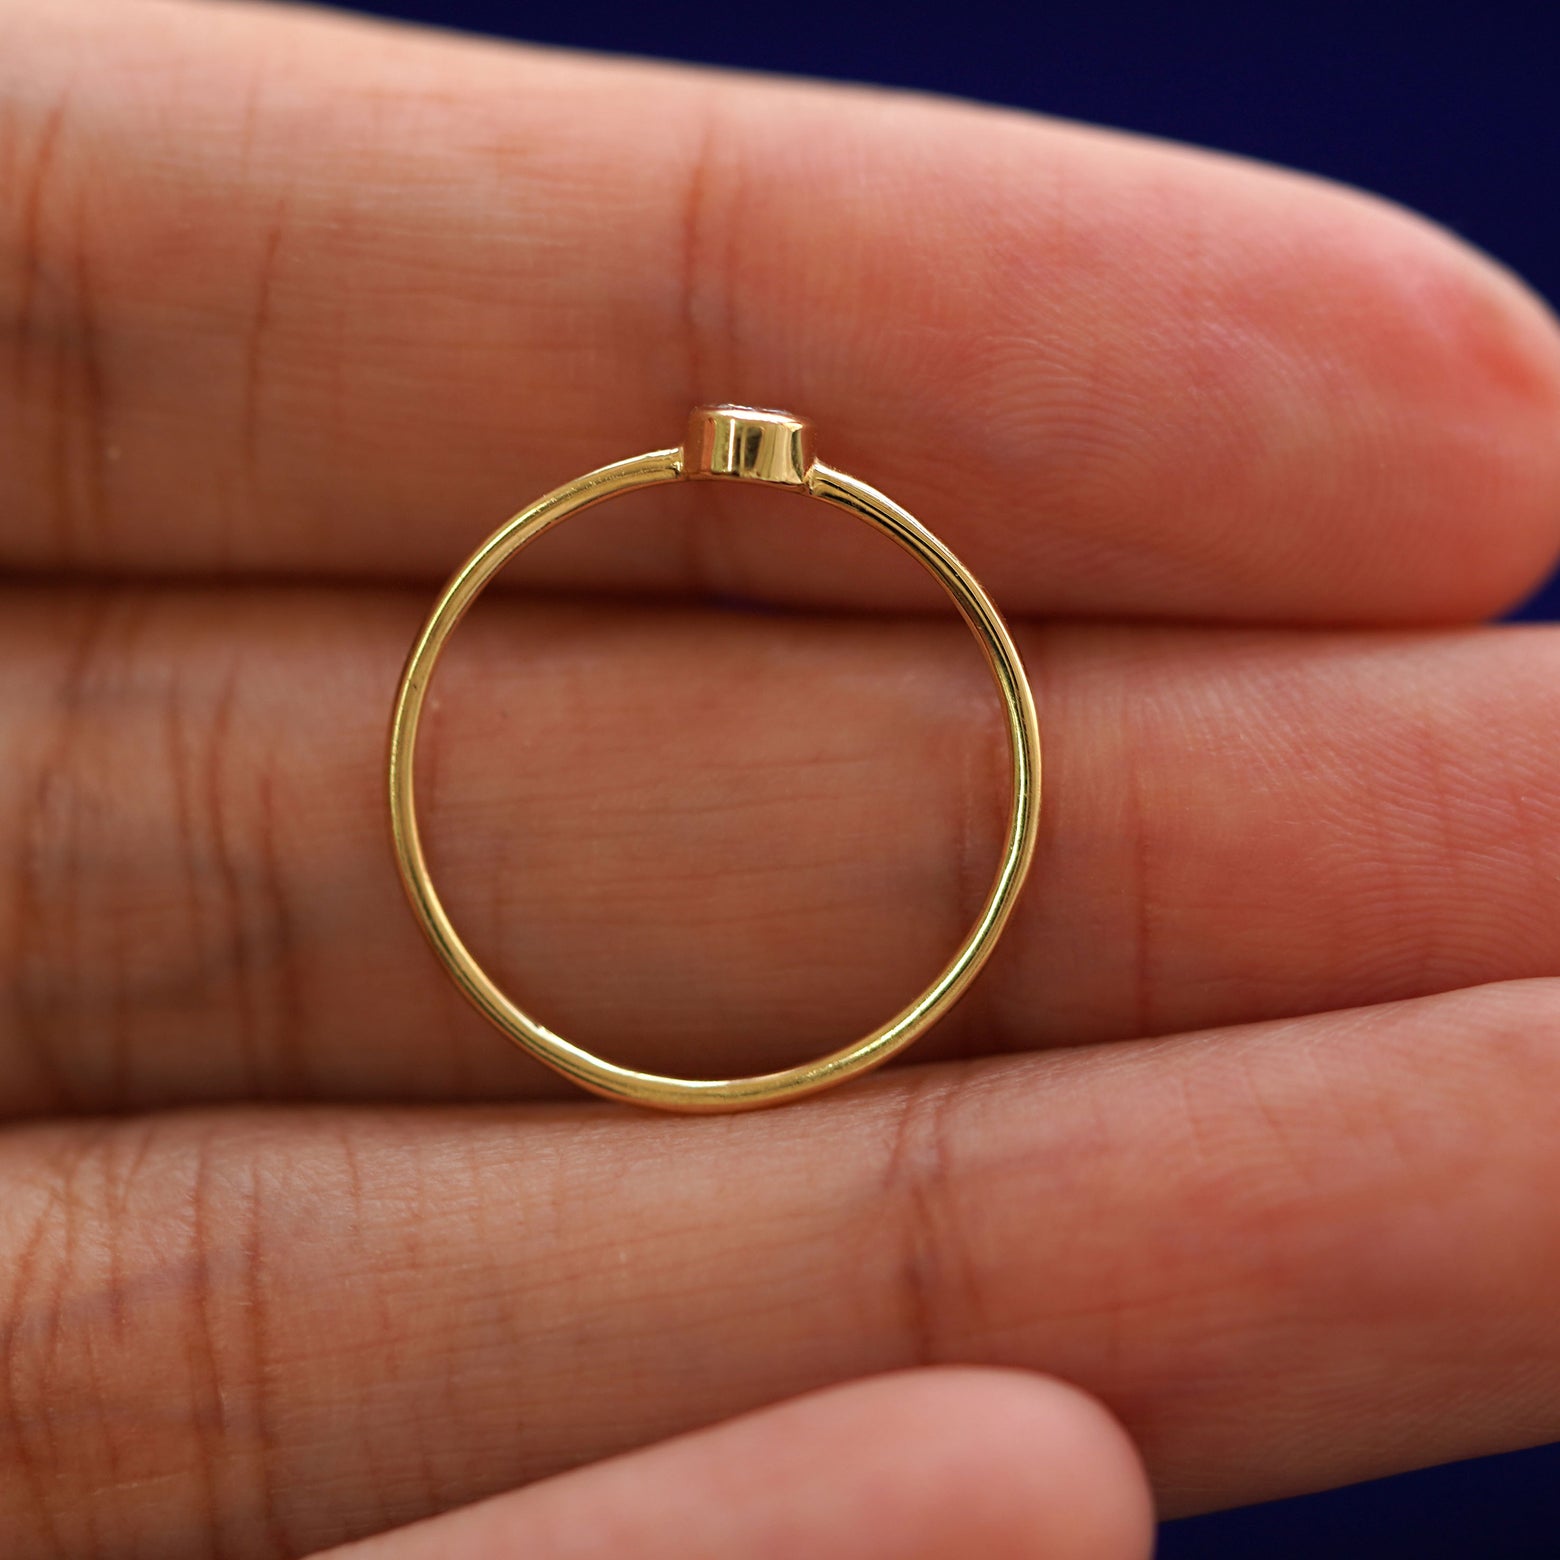 A yellow gold Black Diamond Ring in a model's hand showing the thickness of the band